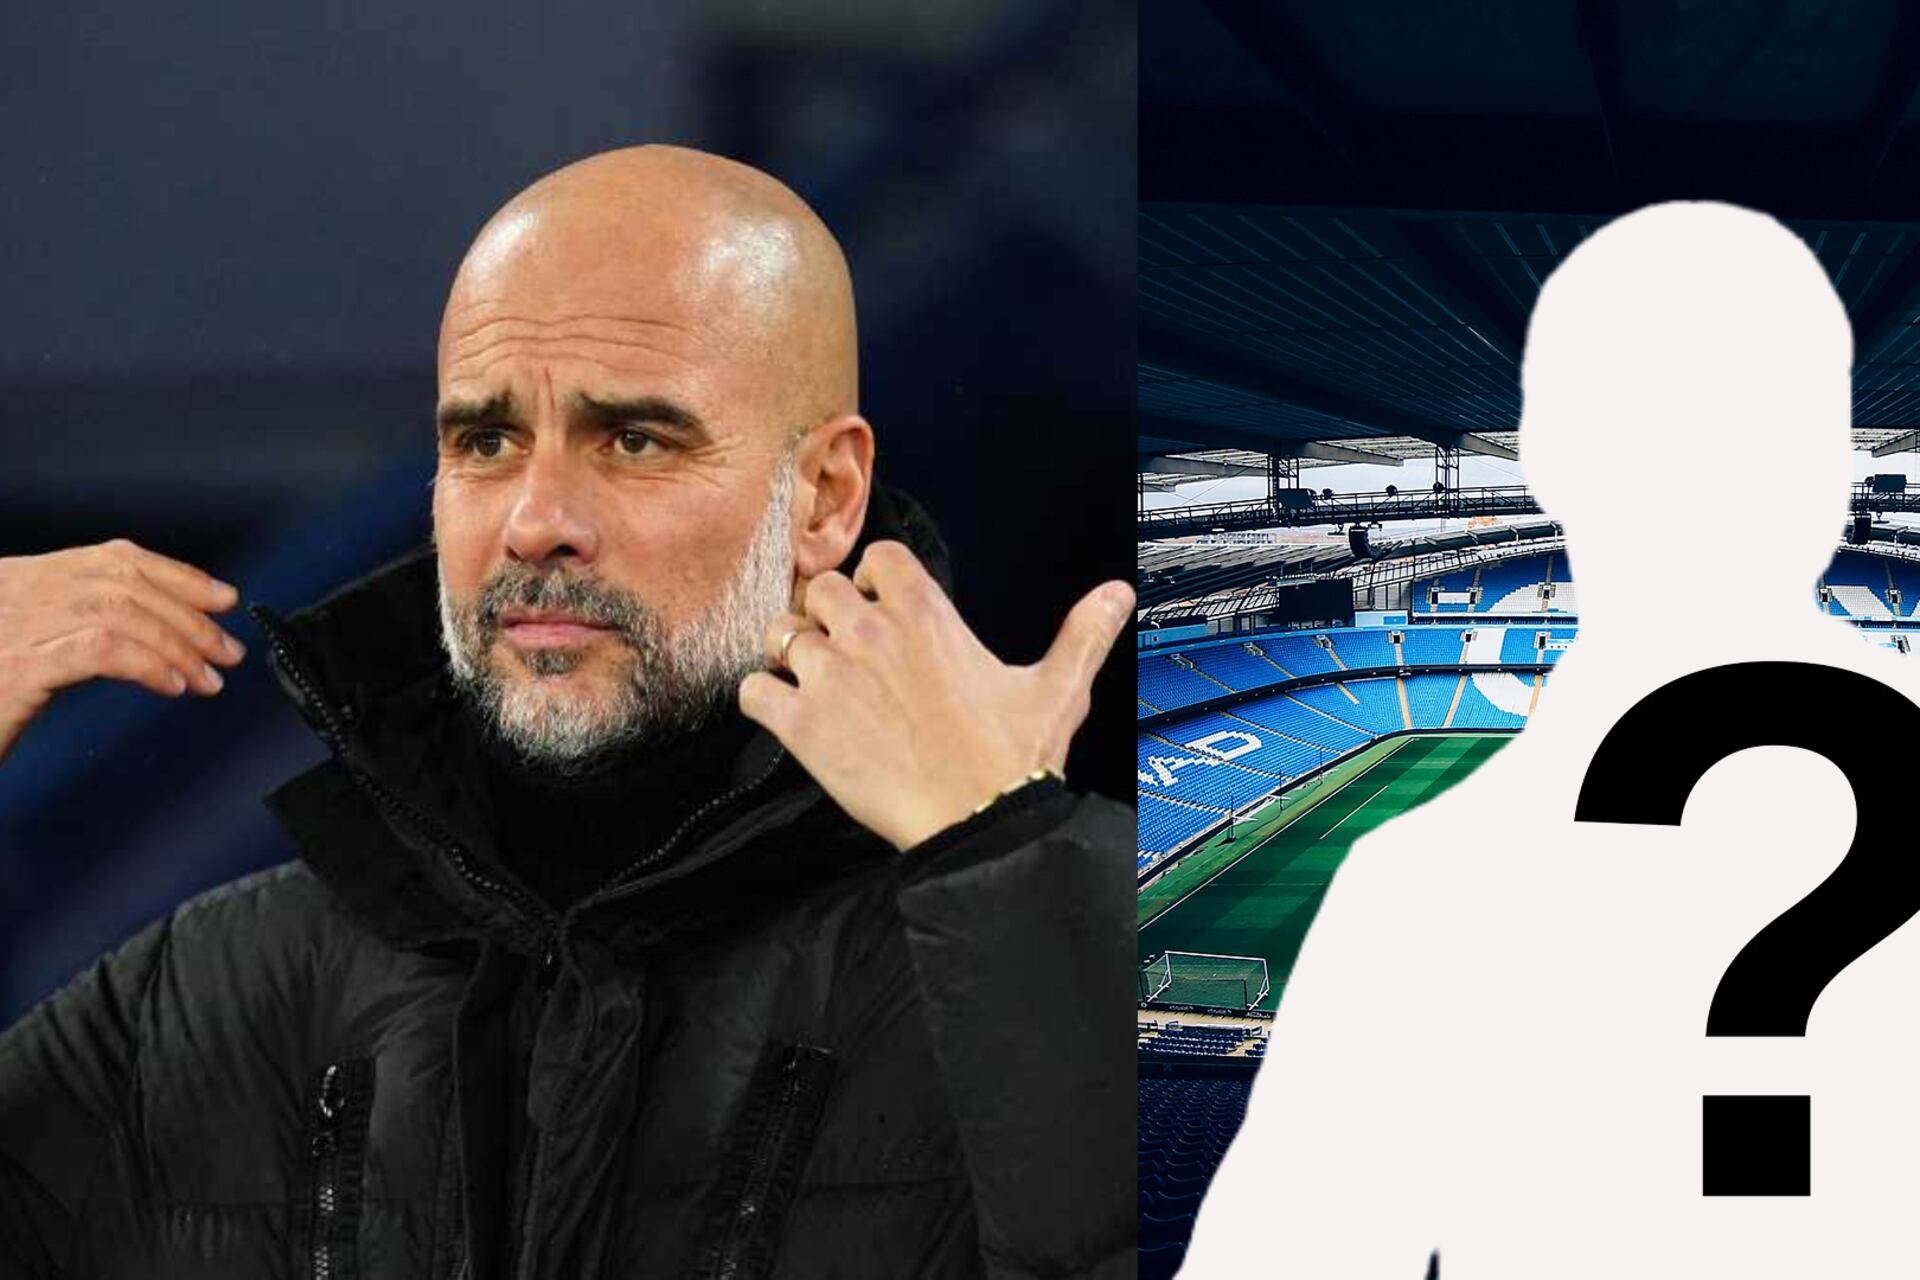 (PHOTO) The NBA coach that went to visit Pep Guardiola and Manchester City